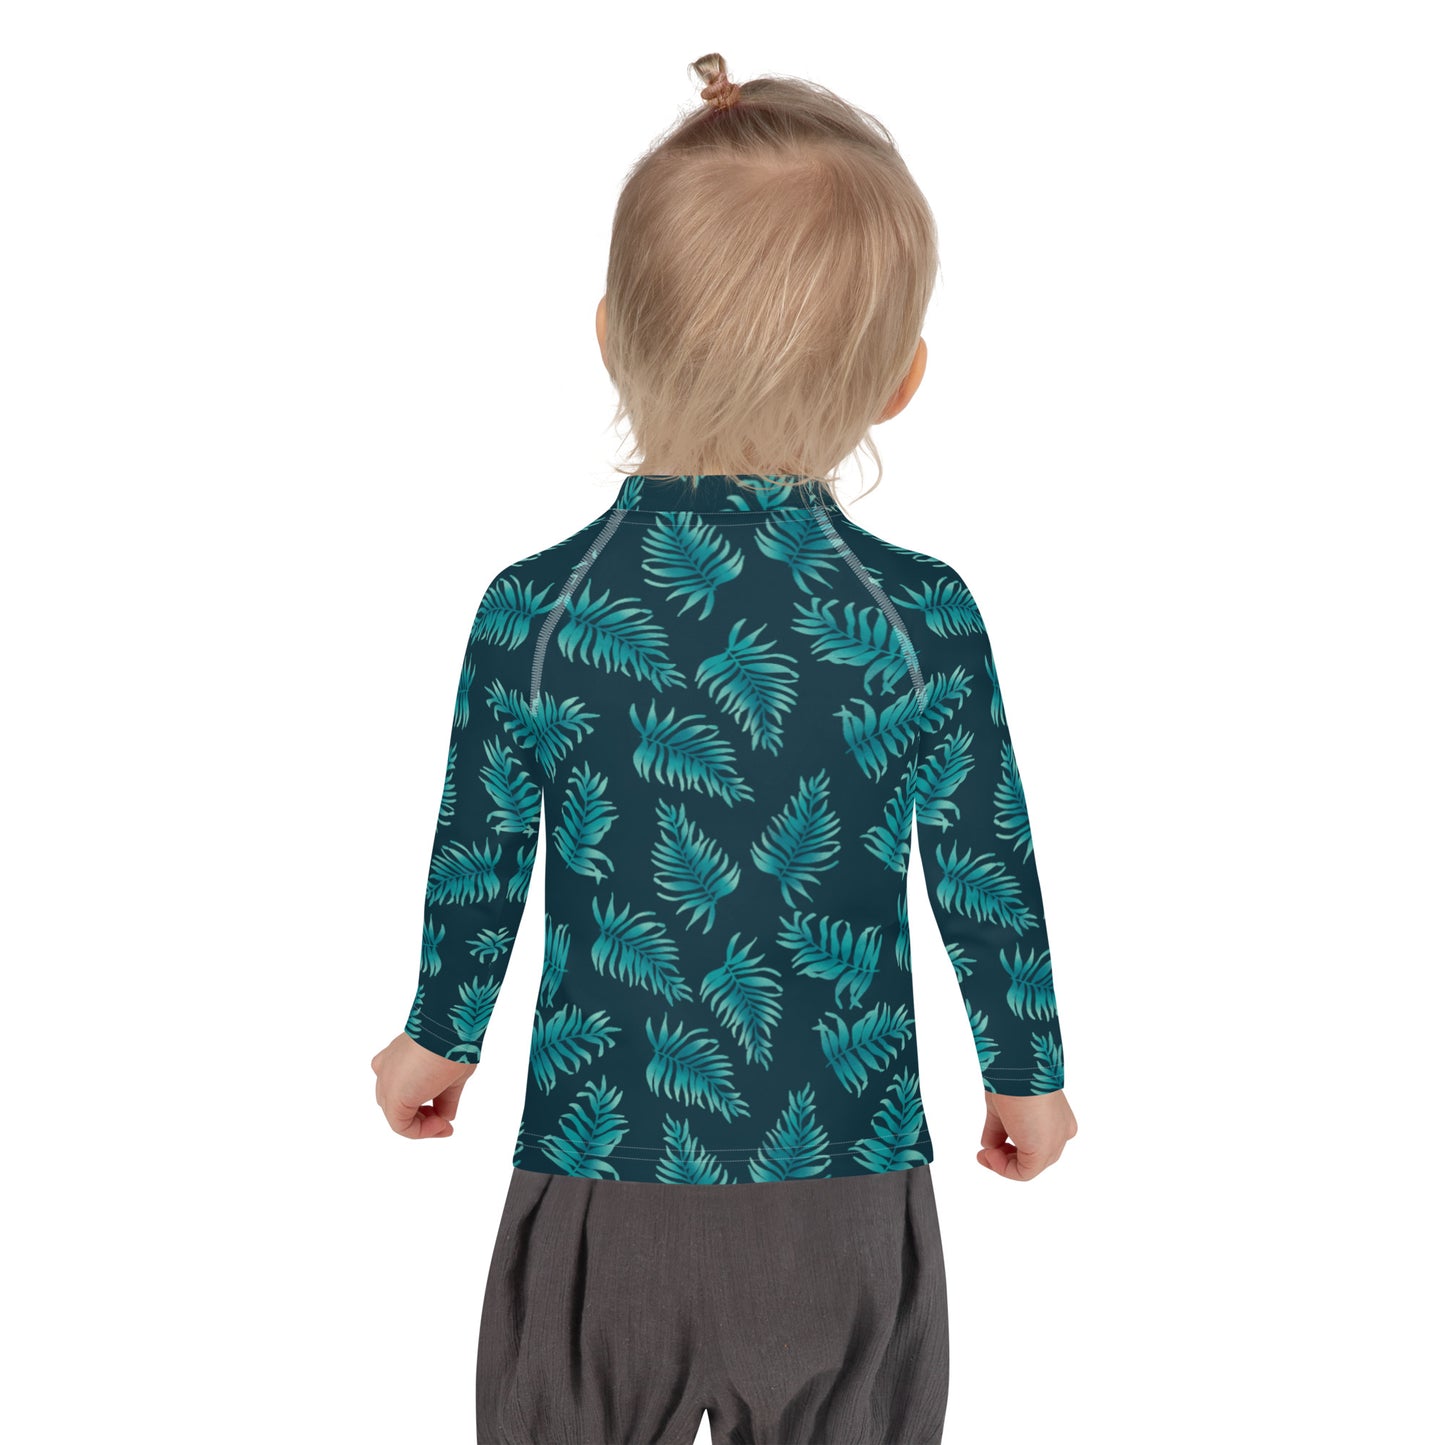 Kids Rash Guard 2T - 7 years - Palm Leaves in Blue Ombre